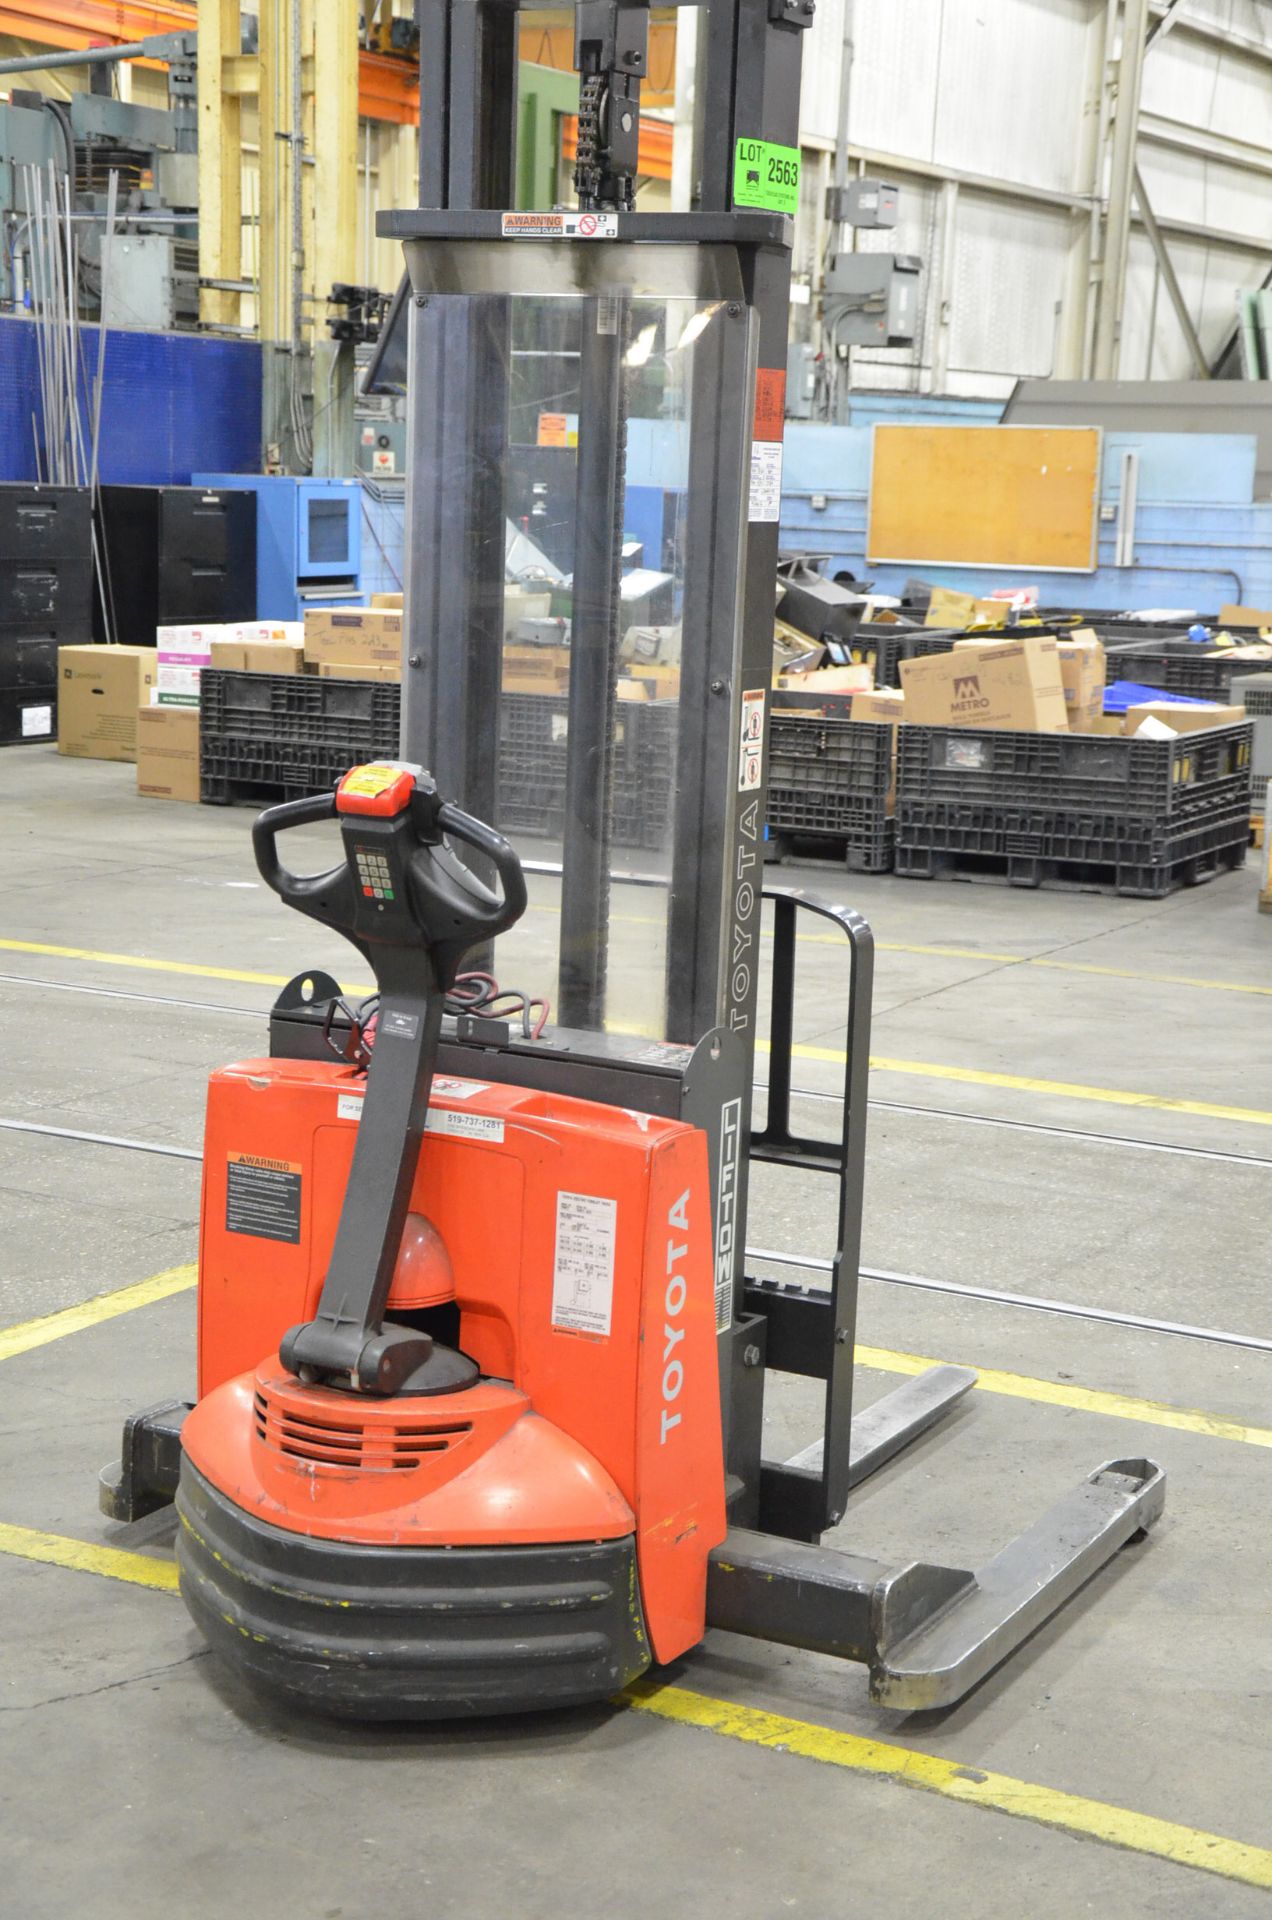 TOYOTA 7BWS13 24V 2500 LB. CAPACITY WALK-BEHIND ELECTRIC PALLET STACKER WITH 143" MAX. LIFT - Image 4 of 8